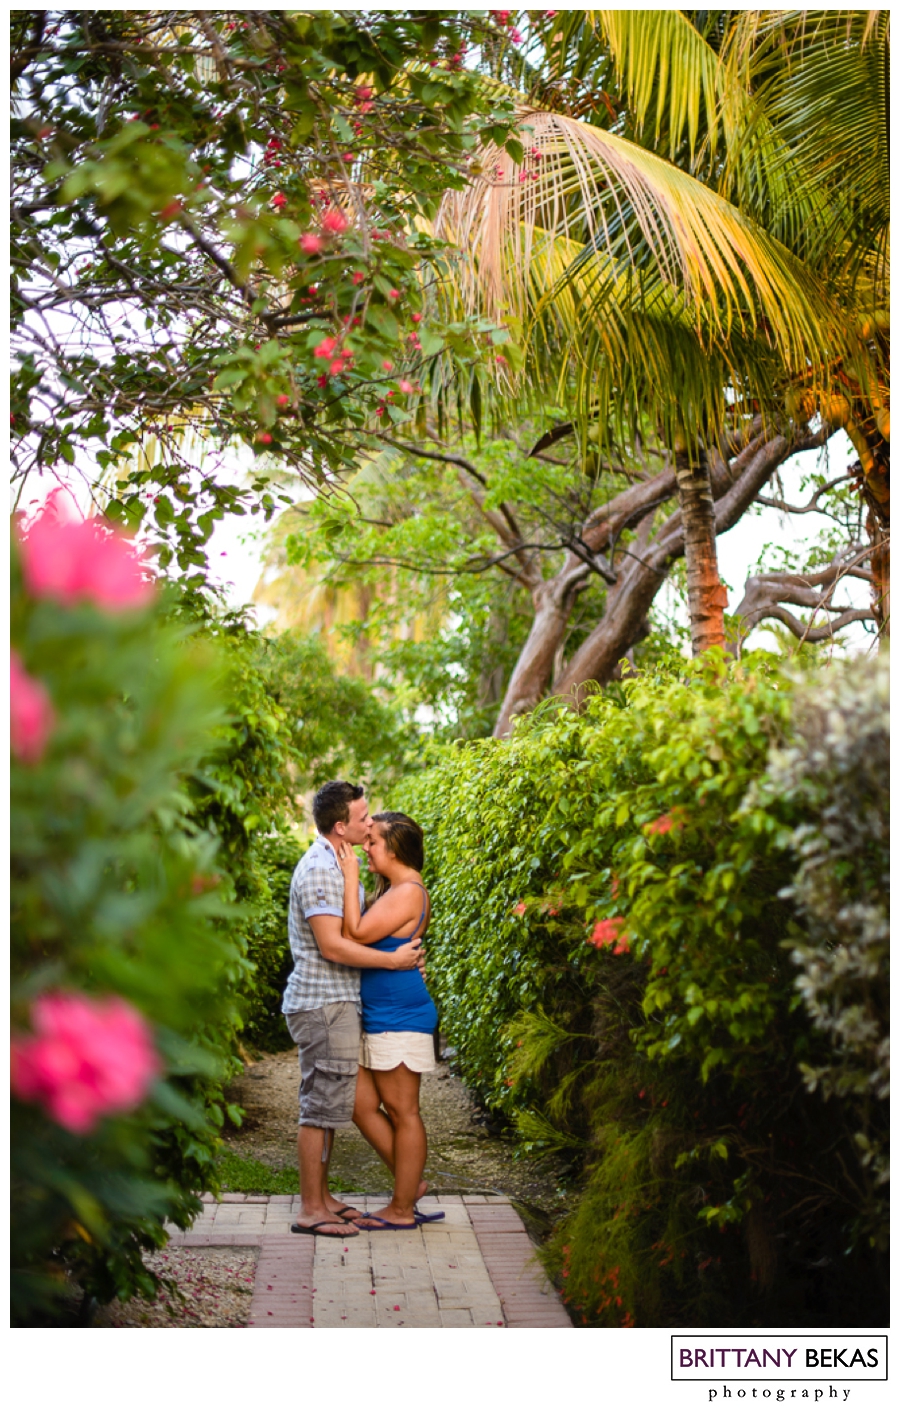 GRAND CAYMAN ENGAGEMENT PHOTOS | BRITTANY BEKAS PHOTOGRAPHY | CHICAGO + GRAND CAYMAN WEDDING AND ENGAGEMENT PHOTOGRAPHER